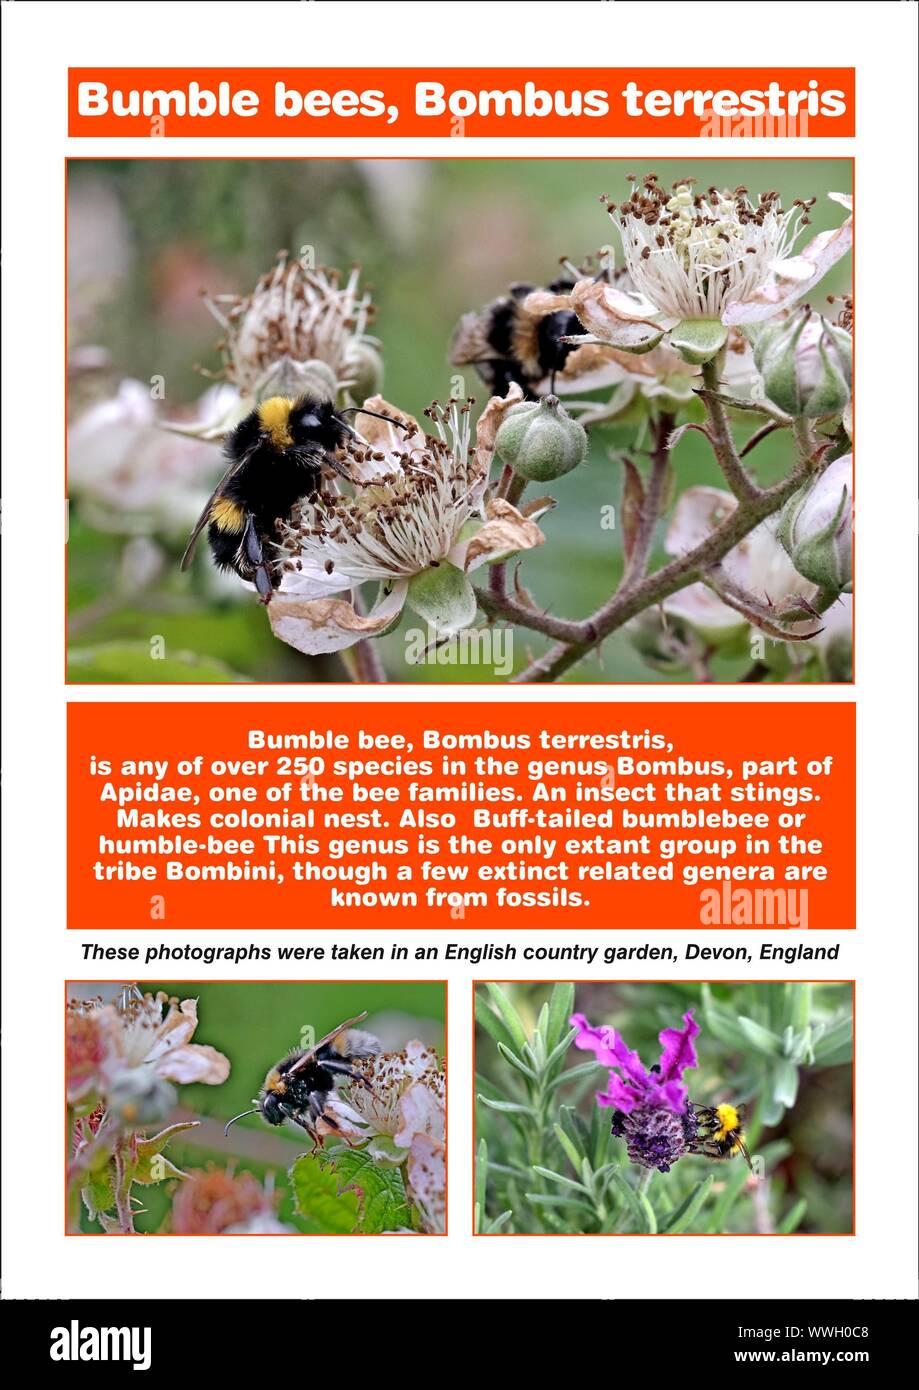 Bumble bees, Bombus terrestris, an insect that stings. Makes colonial nest,  Buff-tailed bumblebee, humble-bee, A4, A4 Page, photo, description, text; Stock Photo